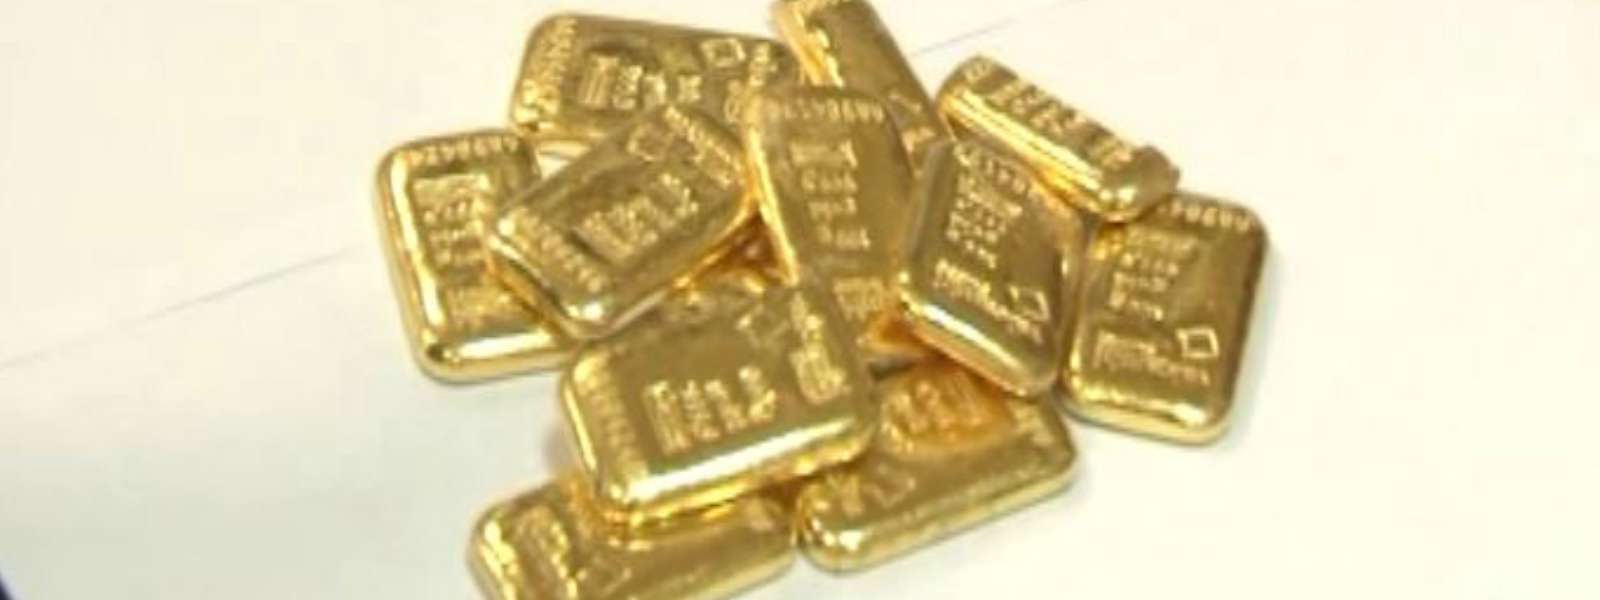 Cargo worker at BIA arrested with 65 Gold biscuits